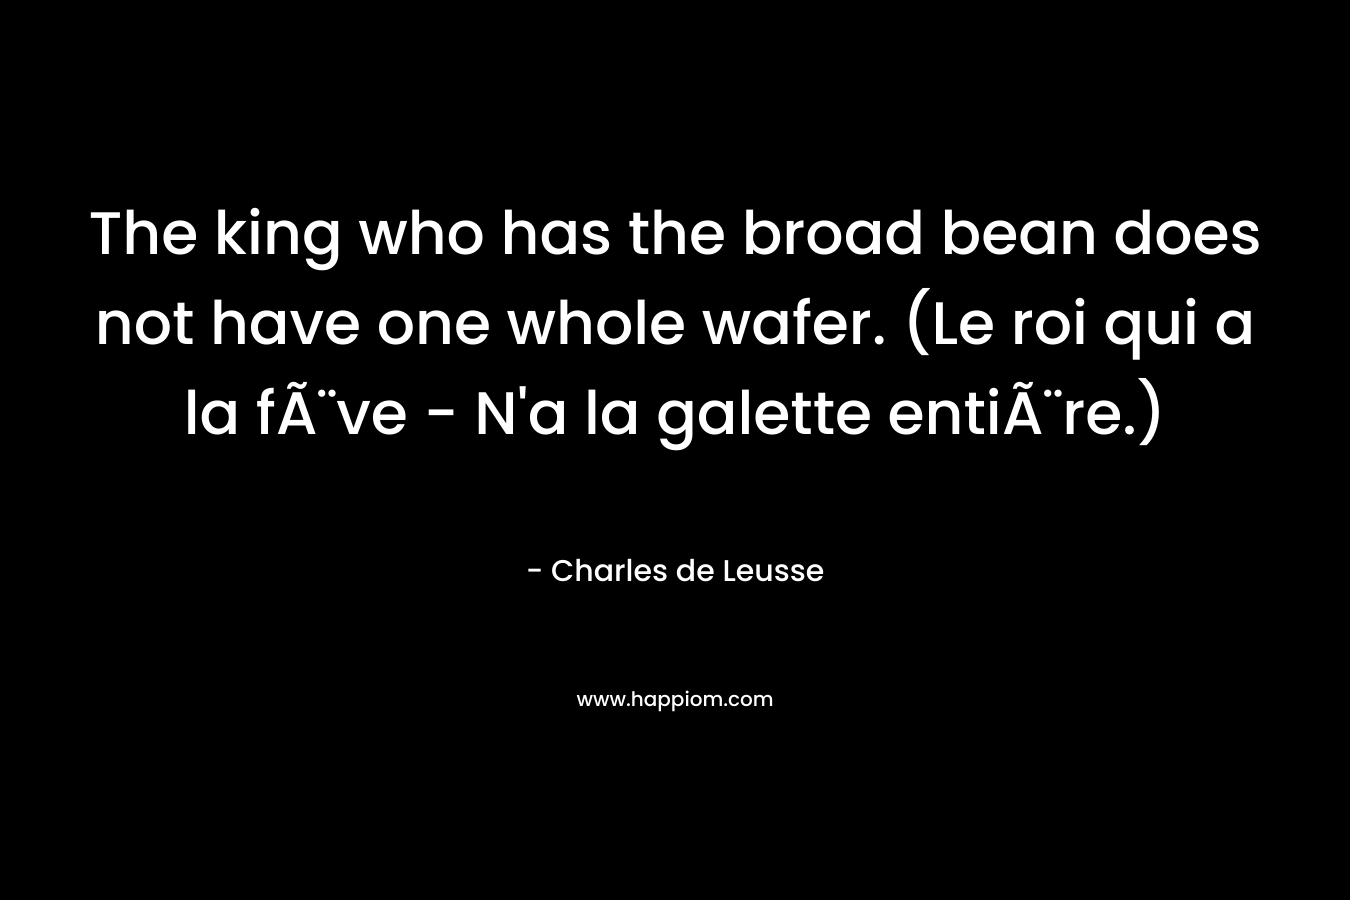 The king who has the broad bean does not have one whole wafer. (Le roi qui a la fÃ¨ve - N'a la galette entiÃ¨re.)